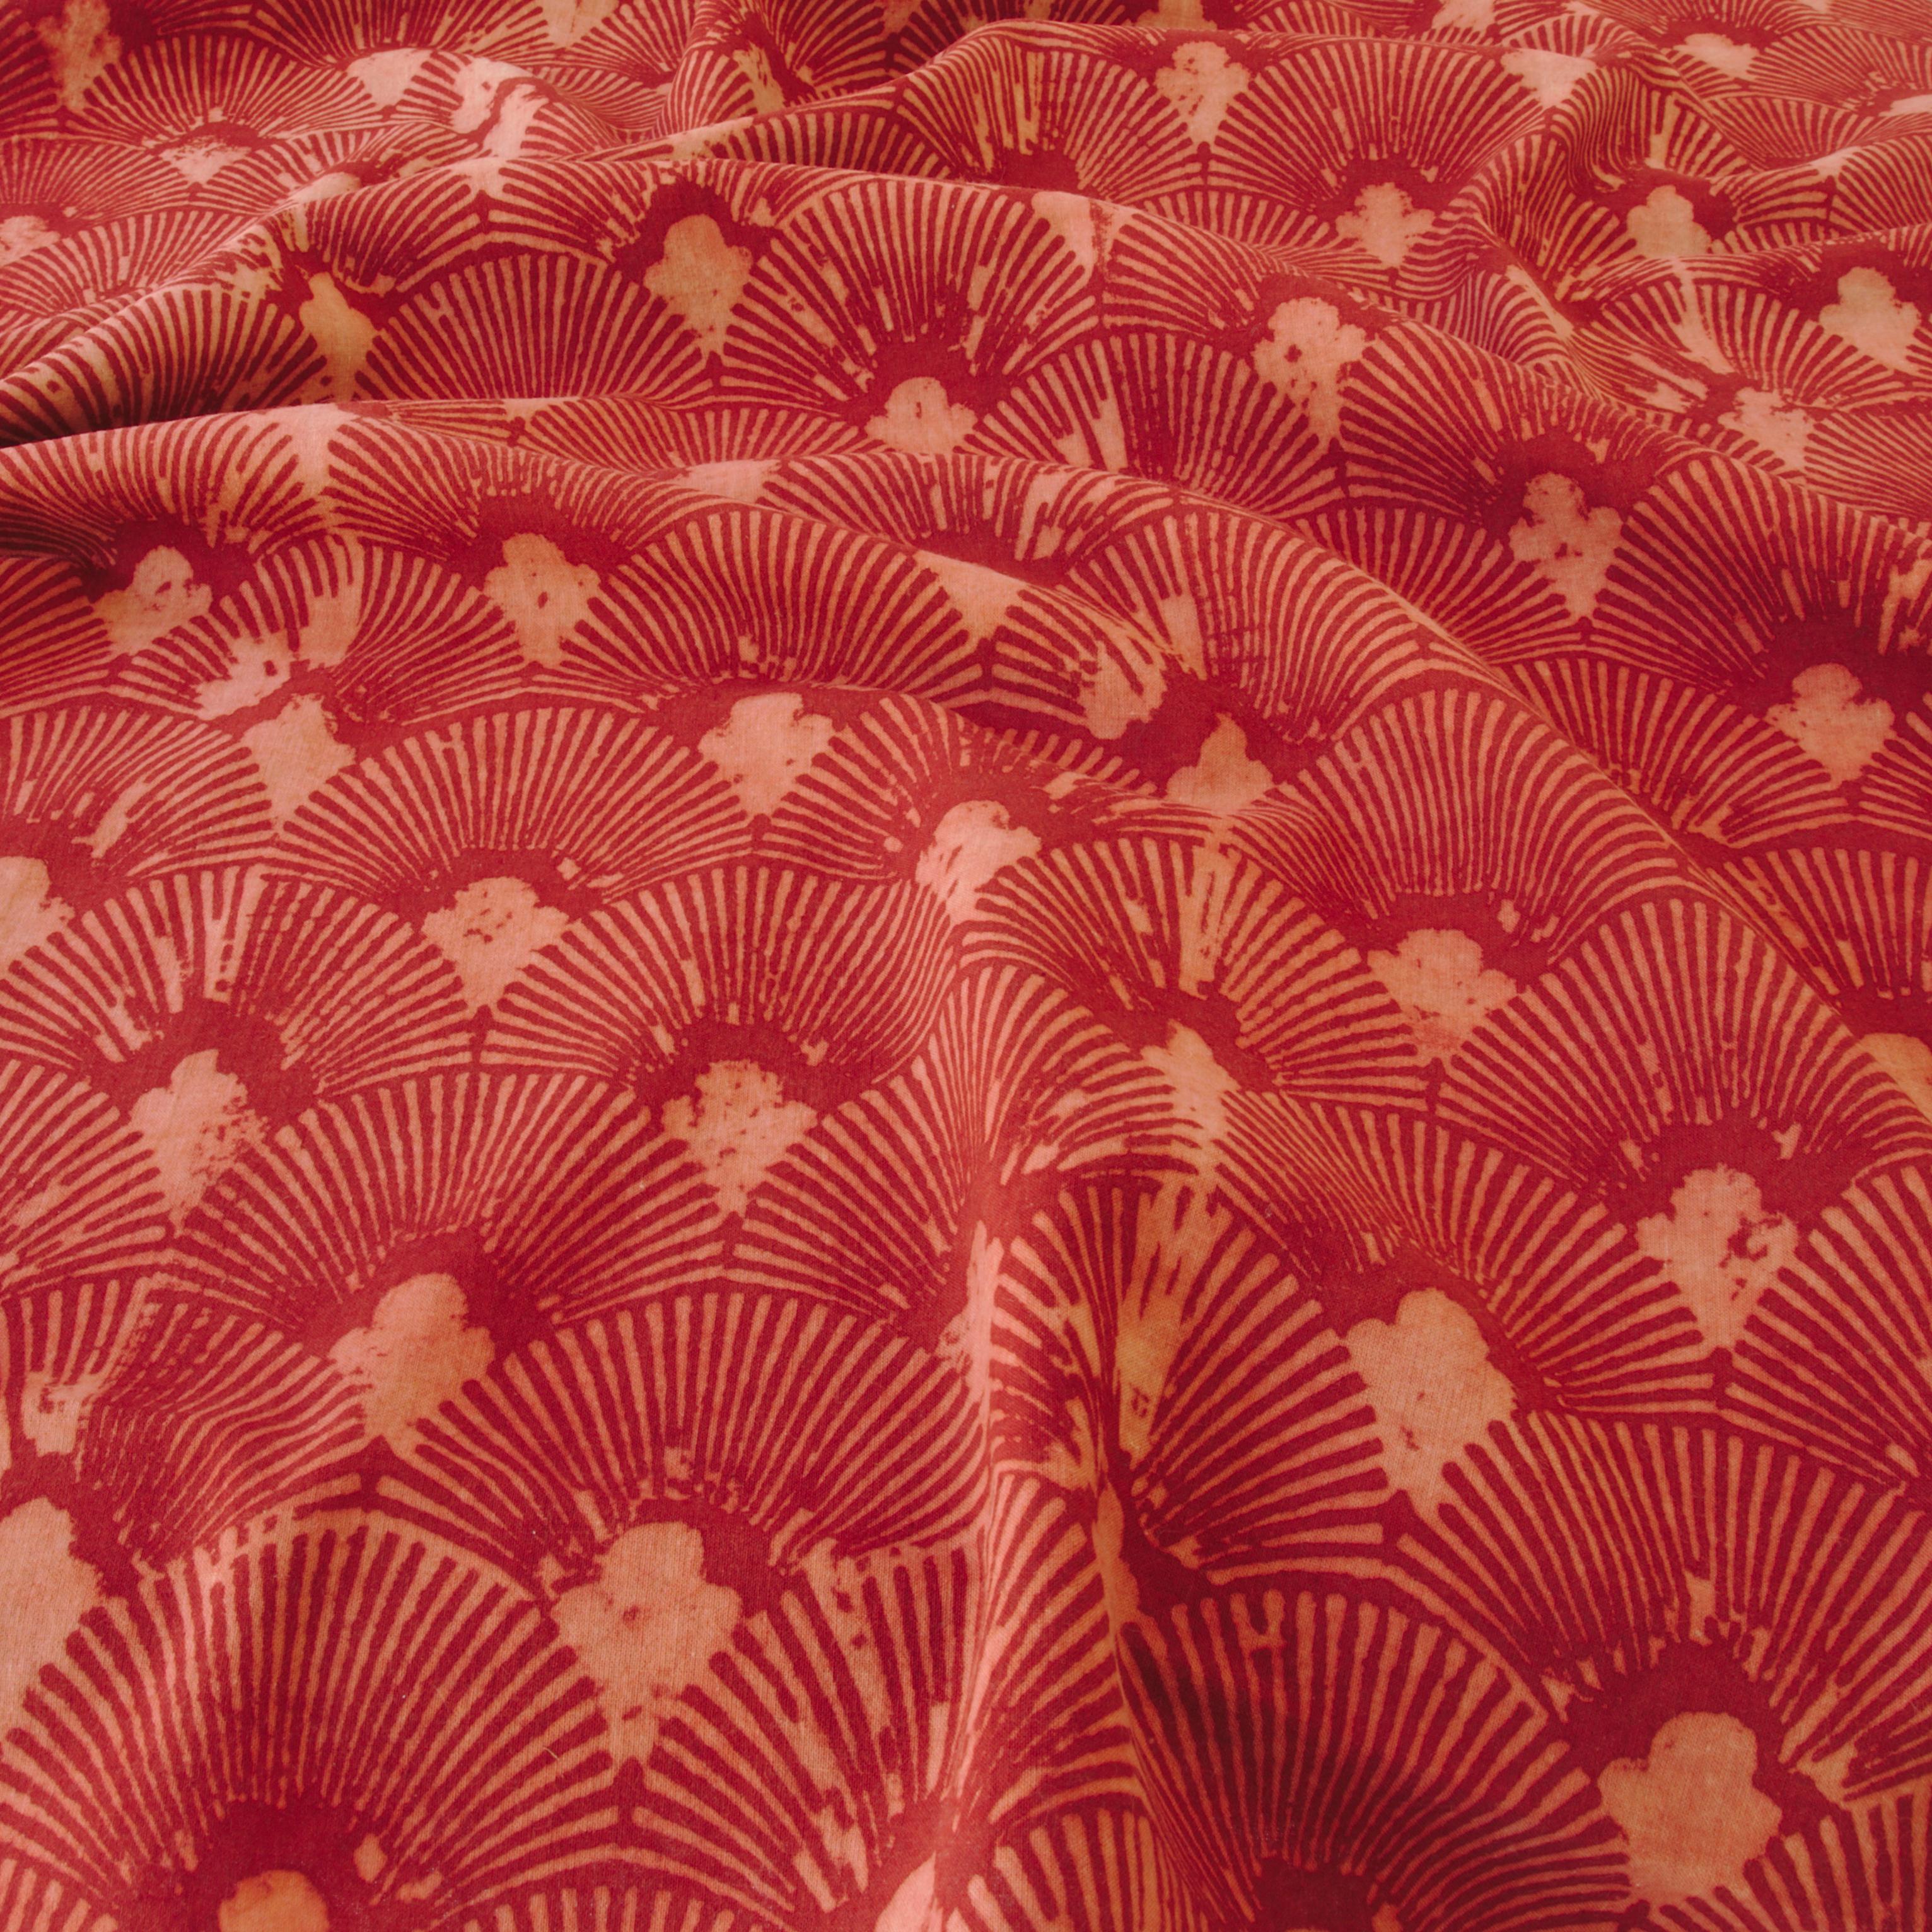 SIK16 - Indian Woodblock-Printed Cotton Fabric - Shell Design - Red Alizarin Dye - Contrast